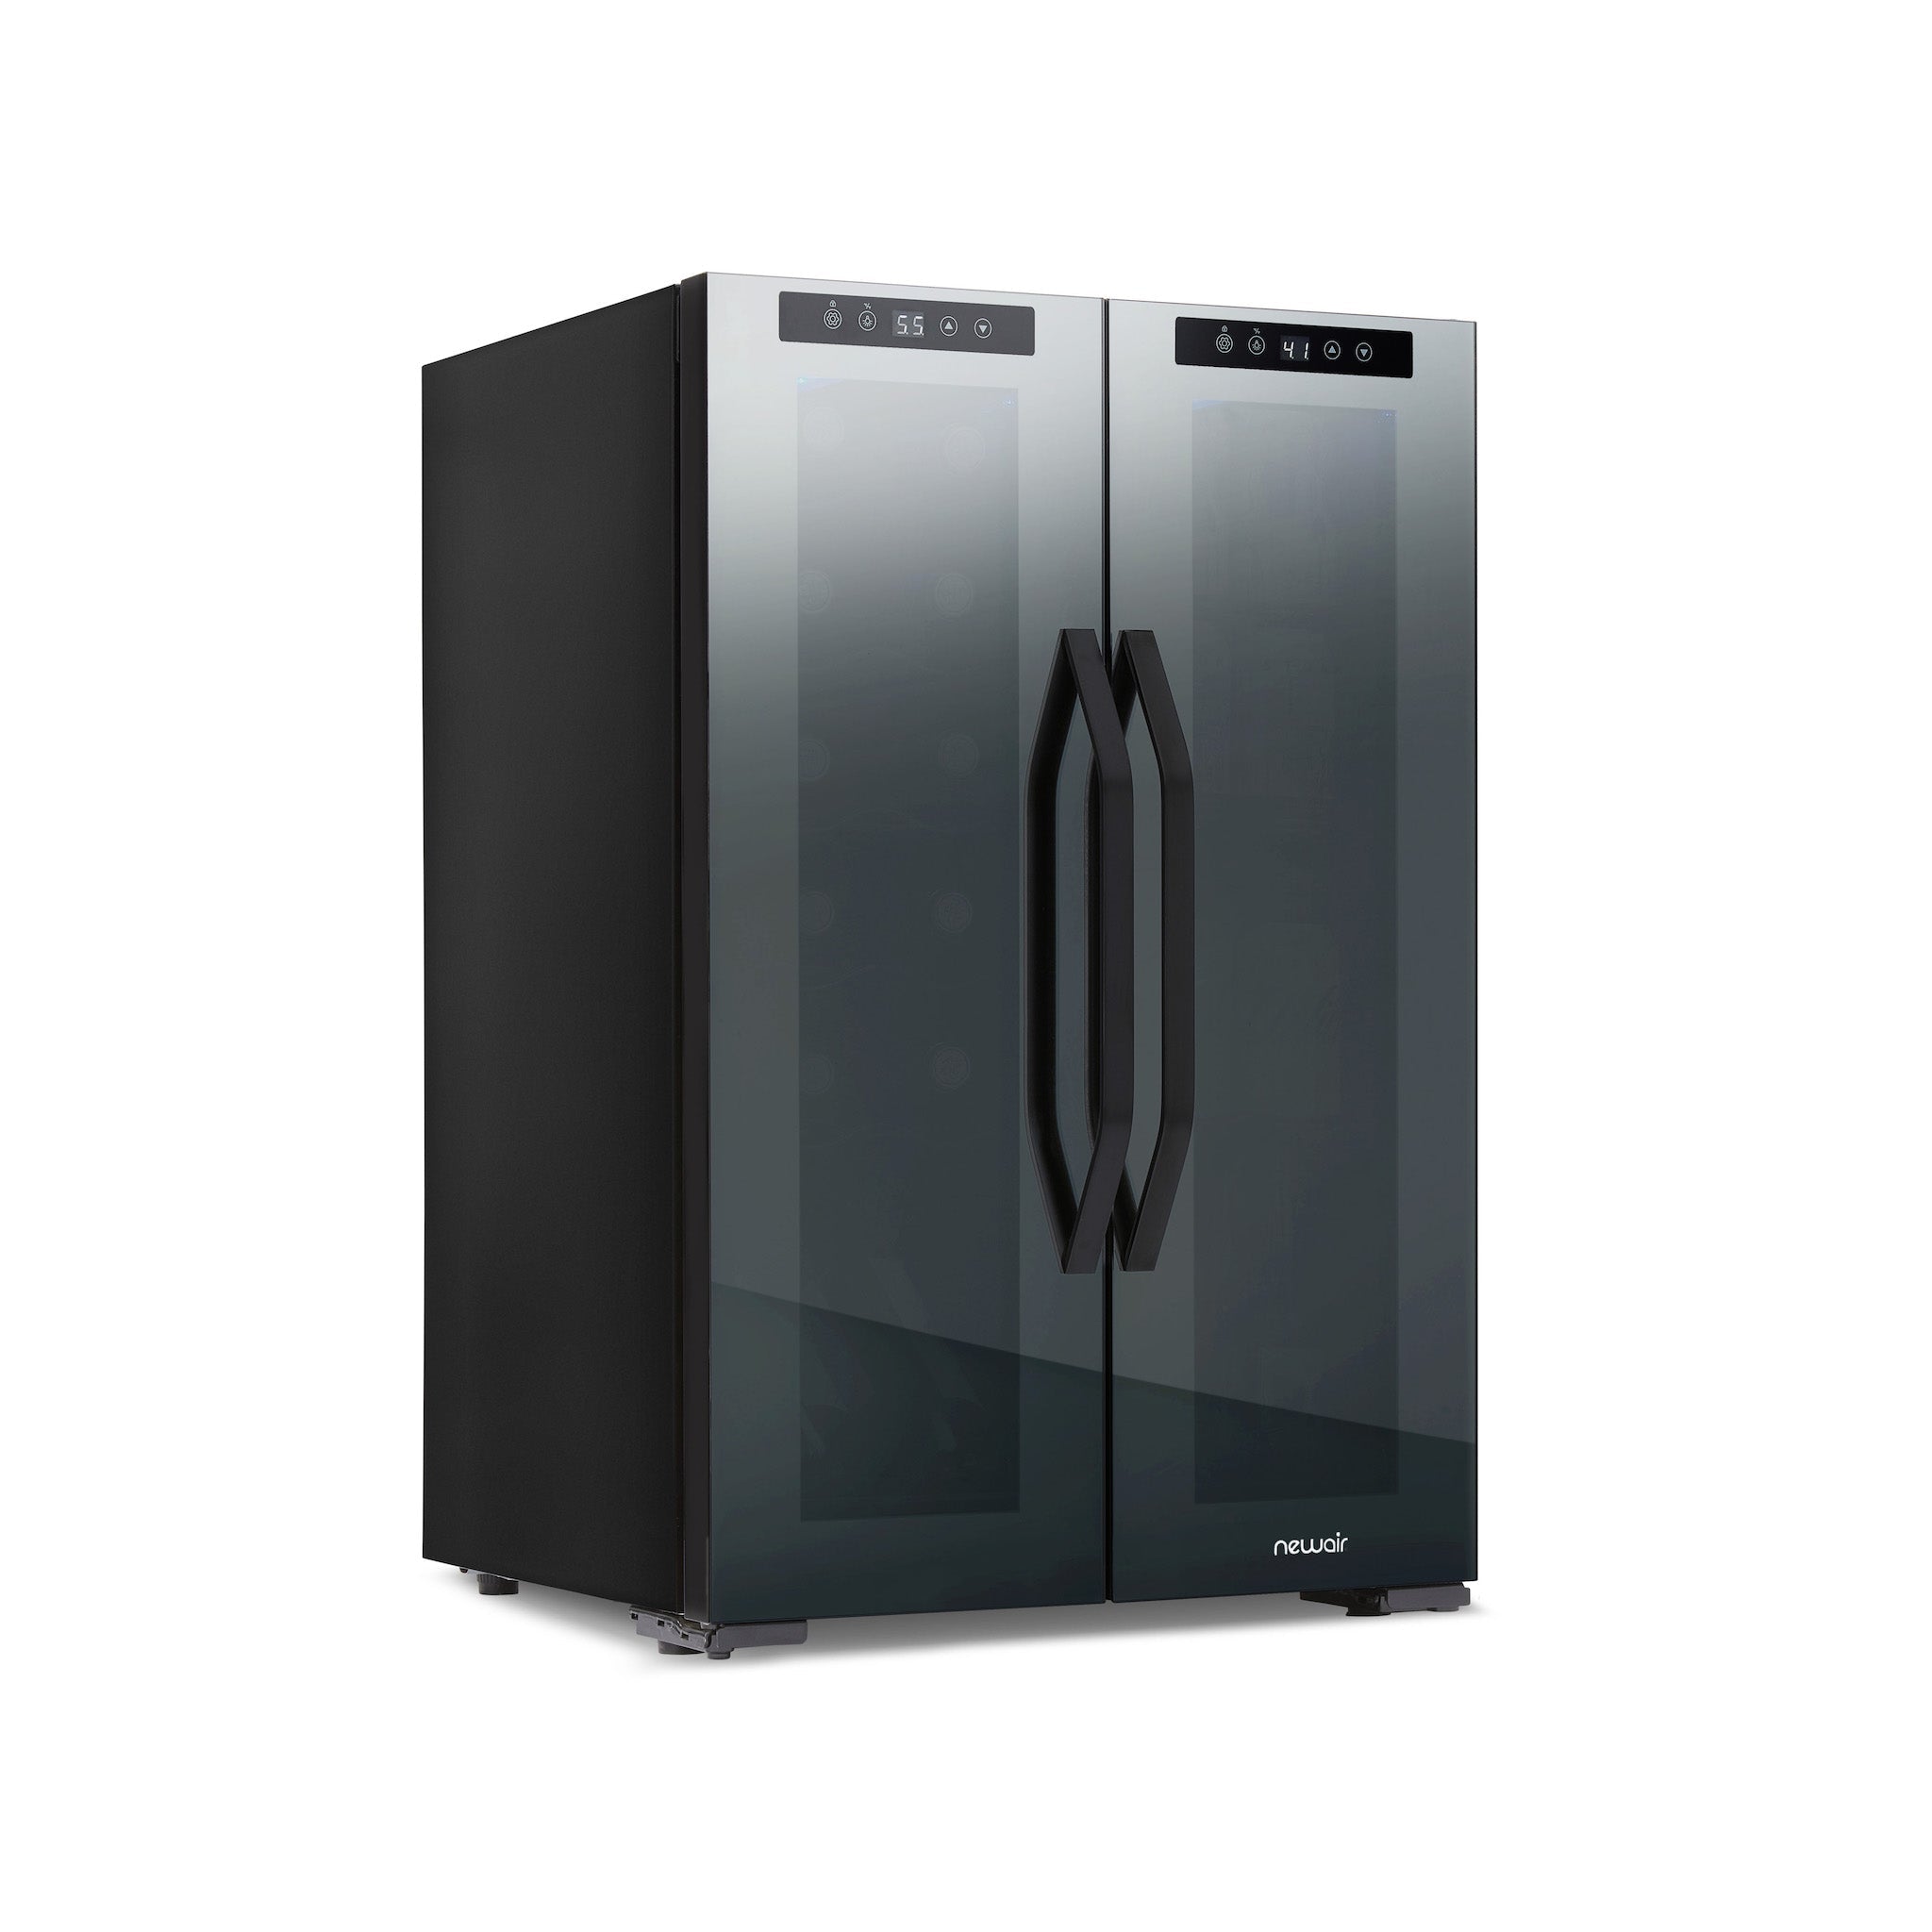 Newair® Shadow?? Series Wine Cooler and Beverage Refrigerator 12 Bottles & 39 Cans Dual Temperature Zones, Freestanding Mirrored Wine Fridge with Double-Layer Tempered Glass Door & Compressor Cooling For Reds, Whites, Sparkling Wine, Beers, and Sodas